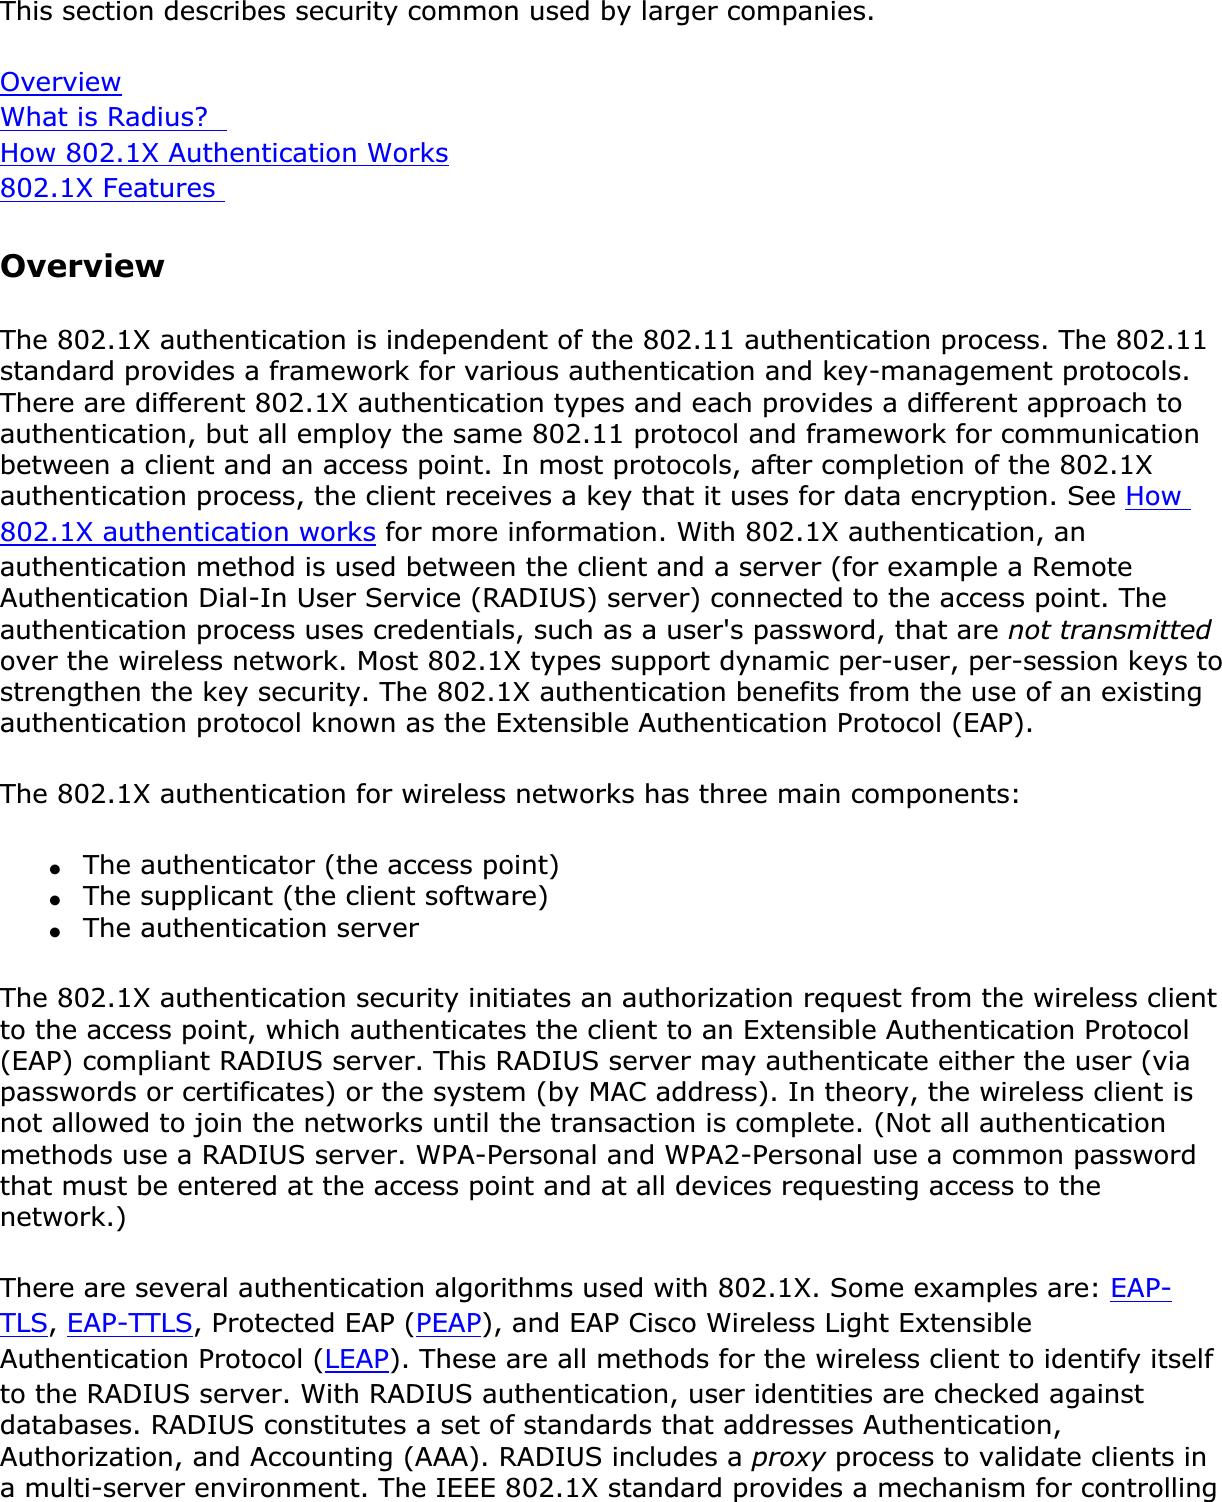 This section describes security common used by larger companies.OverviewWhat is Radius? How 802.1X Authentication Works802.1X Features OverviewThe 802.1X authentication is independent of the 802.11 authentication process. The 802.11 standard provides a framework for various authentication and key-management protocols. There are different 802.1X authentication types and each provides a different approach to authentication, but all employ the same 802.11 protocol and framework for communication between a client and an access point. In most protocols, after completion of the 802.1X authentication process, the client receives a key that it uses for data encryption. See How802.1X authentication works for more information. With 802.1X authentication, an authentication method is used between the client and a server (for example a Remote Authentication Dial-In User Service (RADIUS) server) connected to the access point. The authentication process uses credentials, such as a user&apos;s password, that are not transmitted over the wireless network. Most 802.1X types support dynamic per-user, per-session keys to strengthen the key security. The 802.1X authentication benefits from the use of an existing authentication protocol known as the Extensible Authentication Protocol (EAP).The 802.1X authentication for wireless networks has three main components: ●The authenticator (the access point)●The supplicant (the client software)●The authentication serverThe 802.1X authentication security initiates an authorization request from the wireless client to the access point, which authenticates the client to an Extensible Authentication Protocol (EAP) compliant RADIUS server. This RADIUS server may authenticate either the user (via passwords or certificates) or the system (by MAC address). In theory, the wireless client is not allowed to join the networks until the transaction is complete. (Not all authentication methods use a RADIUS server. WPA-Personal and WPA2-Personal use a common password that must be entered at the access point and at all devices requesting access to the network.)There are several authentication algorithms used with 802.1X. Some examples are: EAP-TLS,EAP-TTLS, Protected EAP (PEAP), and EAP Cisco Wireless Light Extensible Authentication Protocol (LEAP). These are all methods for the wireless client to identify itself to the RADIUS server. With RADIUS authentication, user identities are checked against databases. RADIUS constitutes a set of standards that addresses Authentication, Authorization, and Accounting (AAA). RADIUS includes a proxy process to validate clients in a multi-server environment. The IEEE 802.1X standard provides a mechanism for controlling 